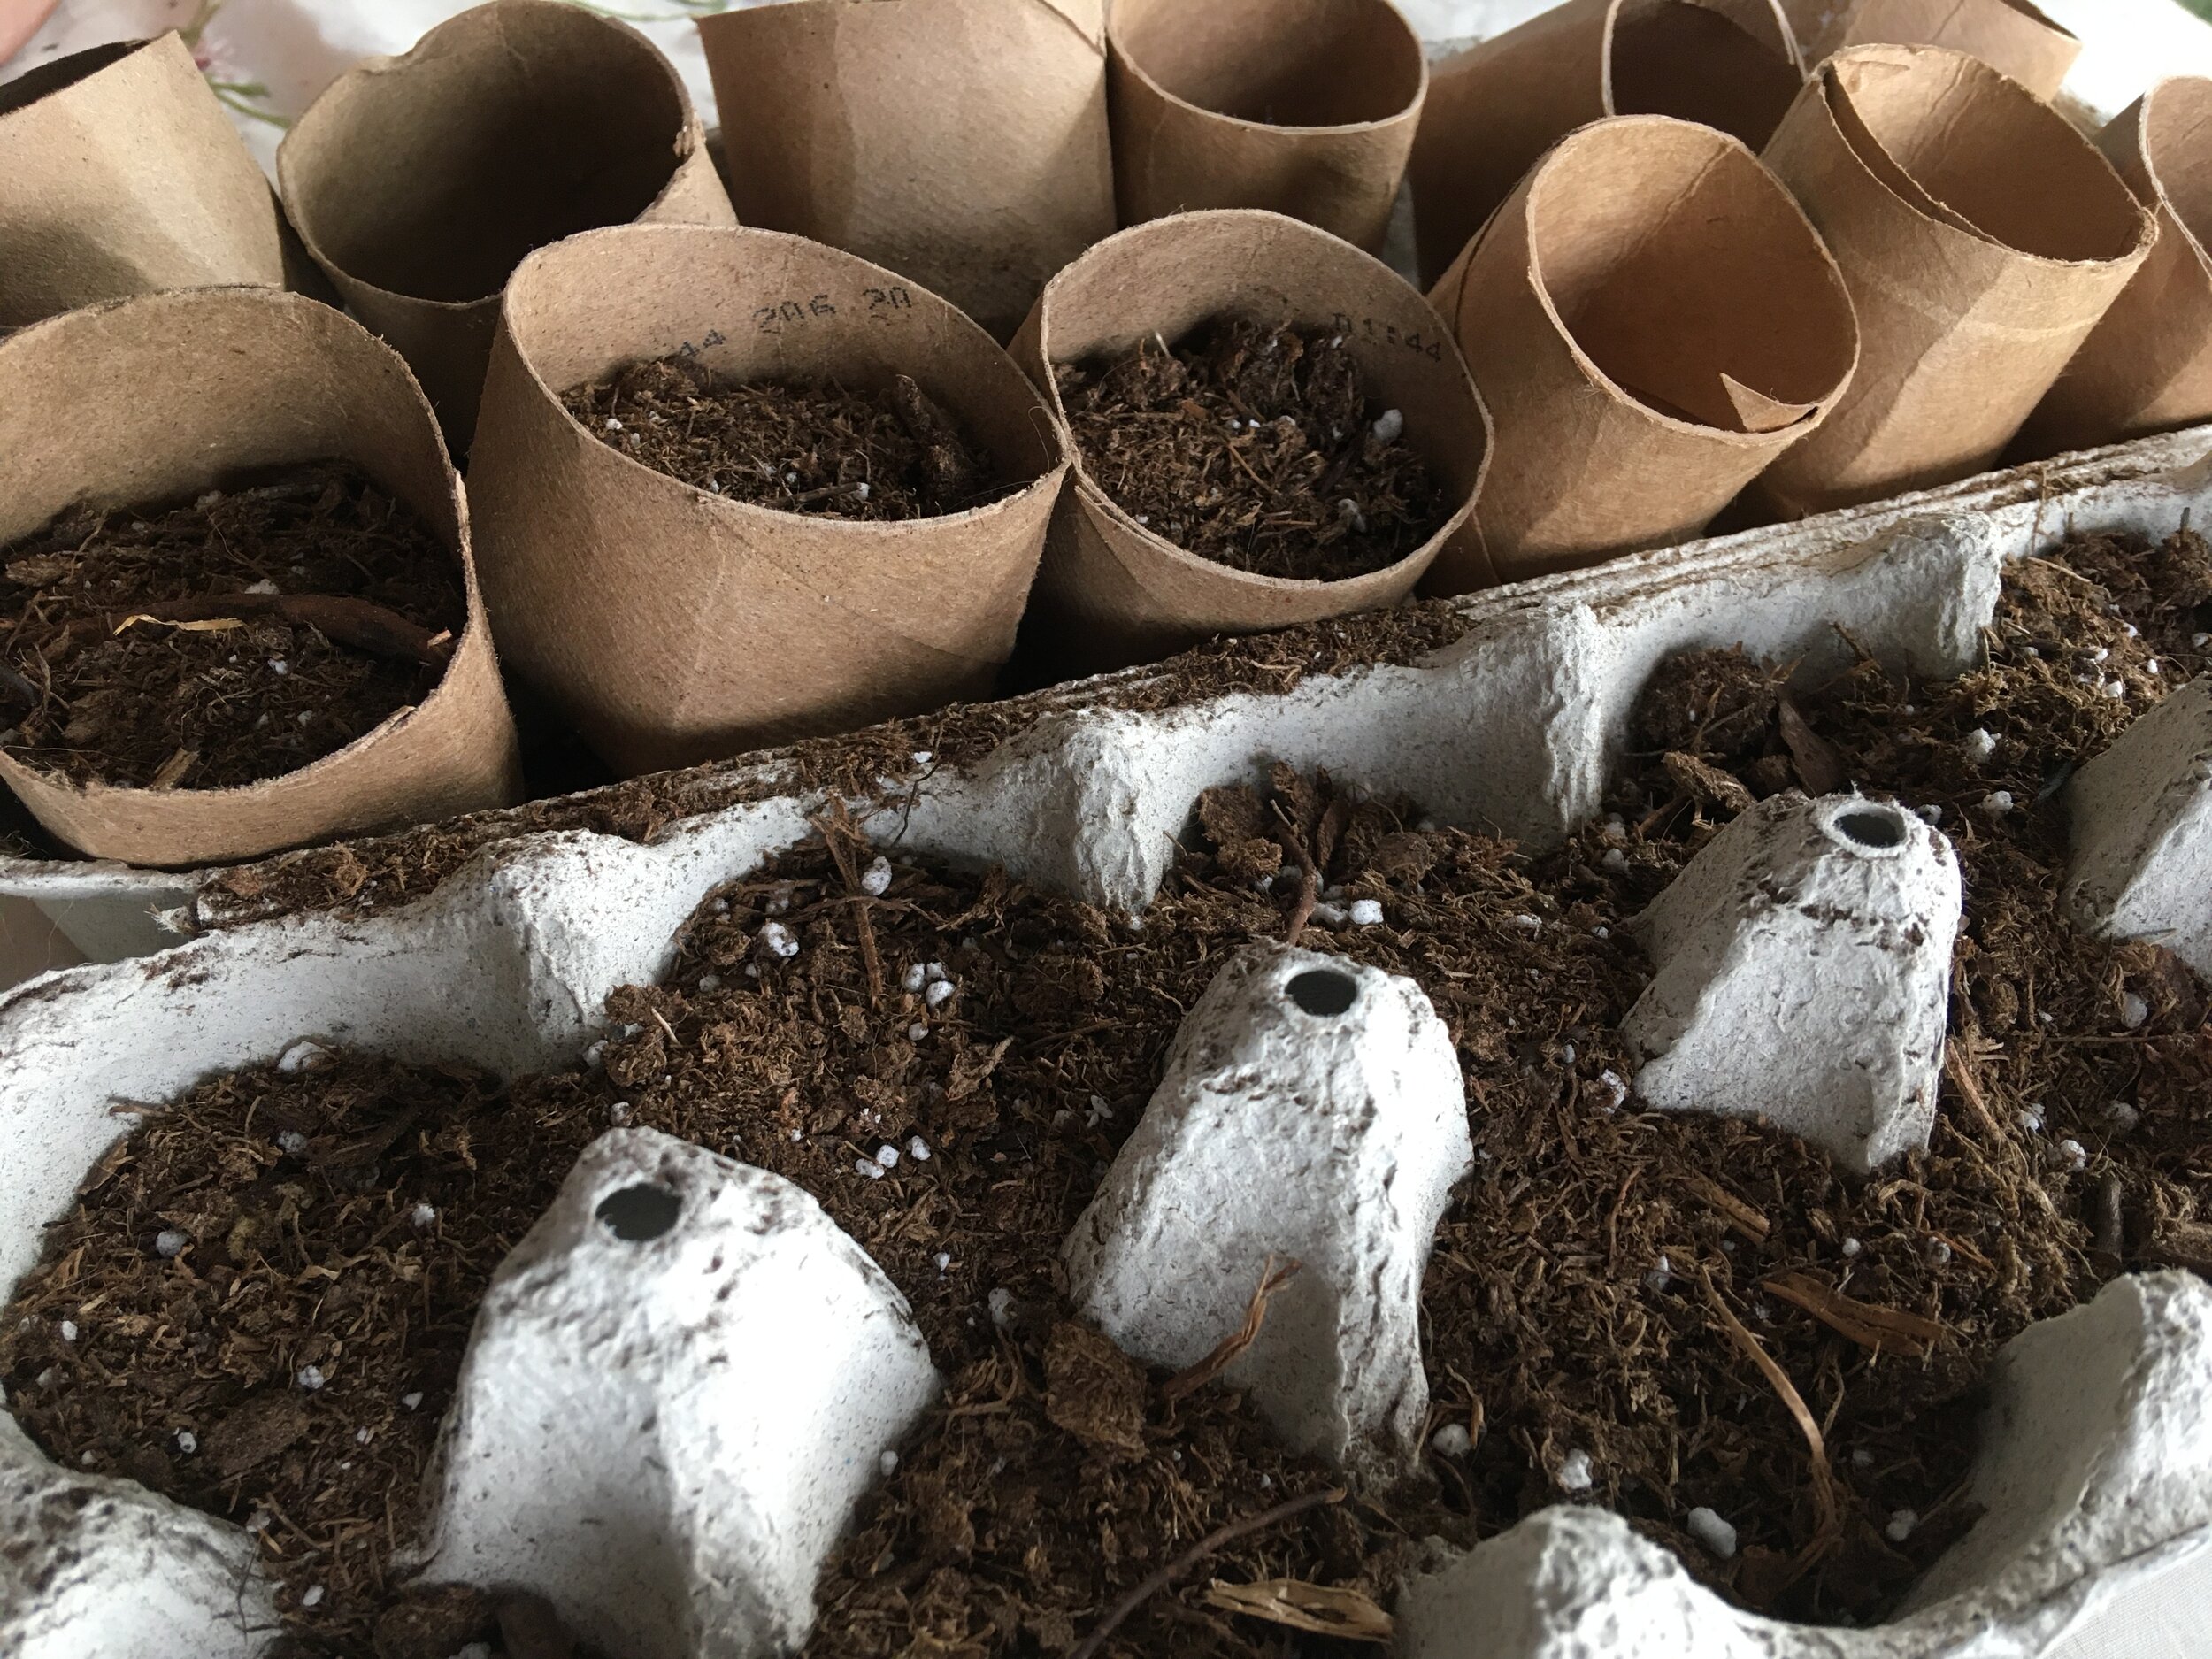 Seedlings growing in reused egg box, tin cans and toilet roll